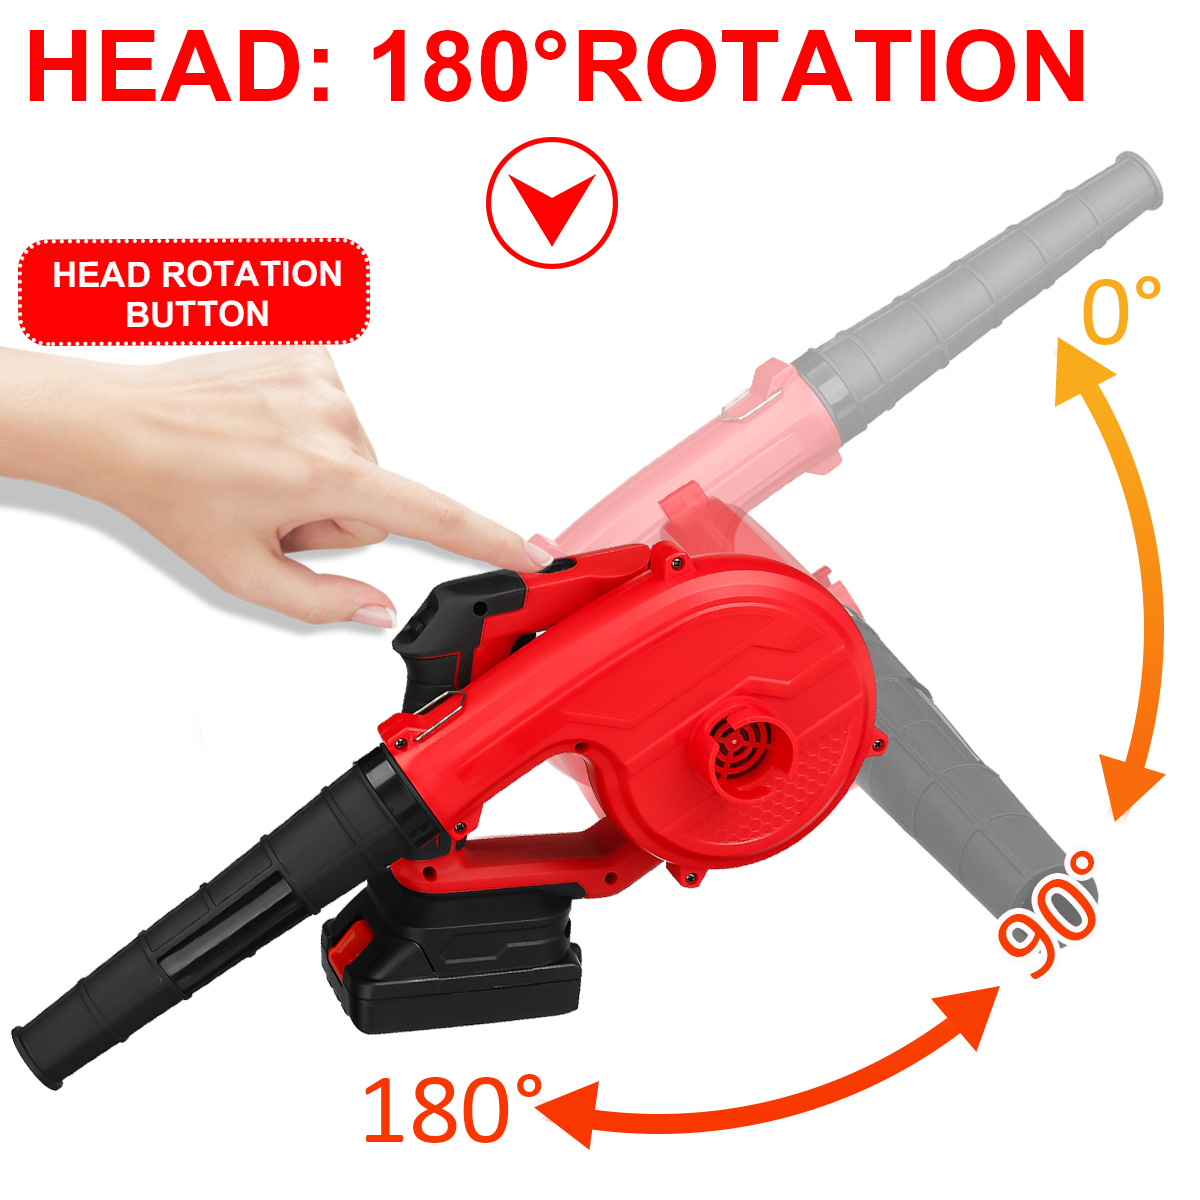 VIOLEWORKS-98VF-2-IN-1-Cordless-180deg-Rotation-Electric-Air-Blower--Suction-Handheld-Leaf-Computer--1920391-5